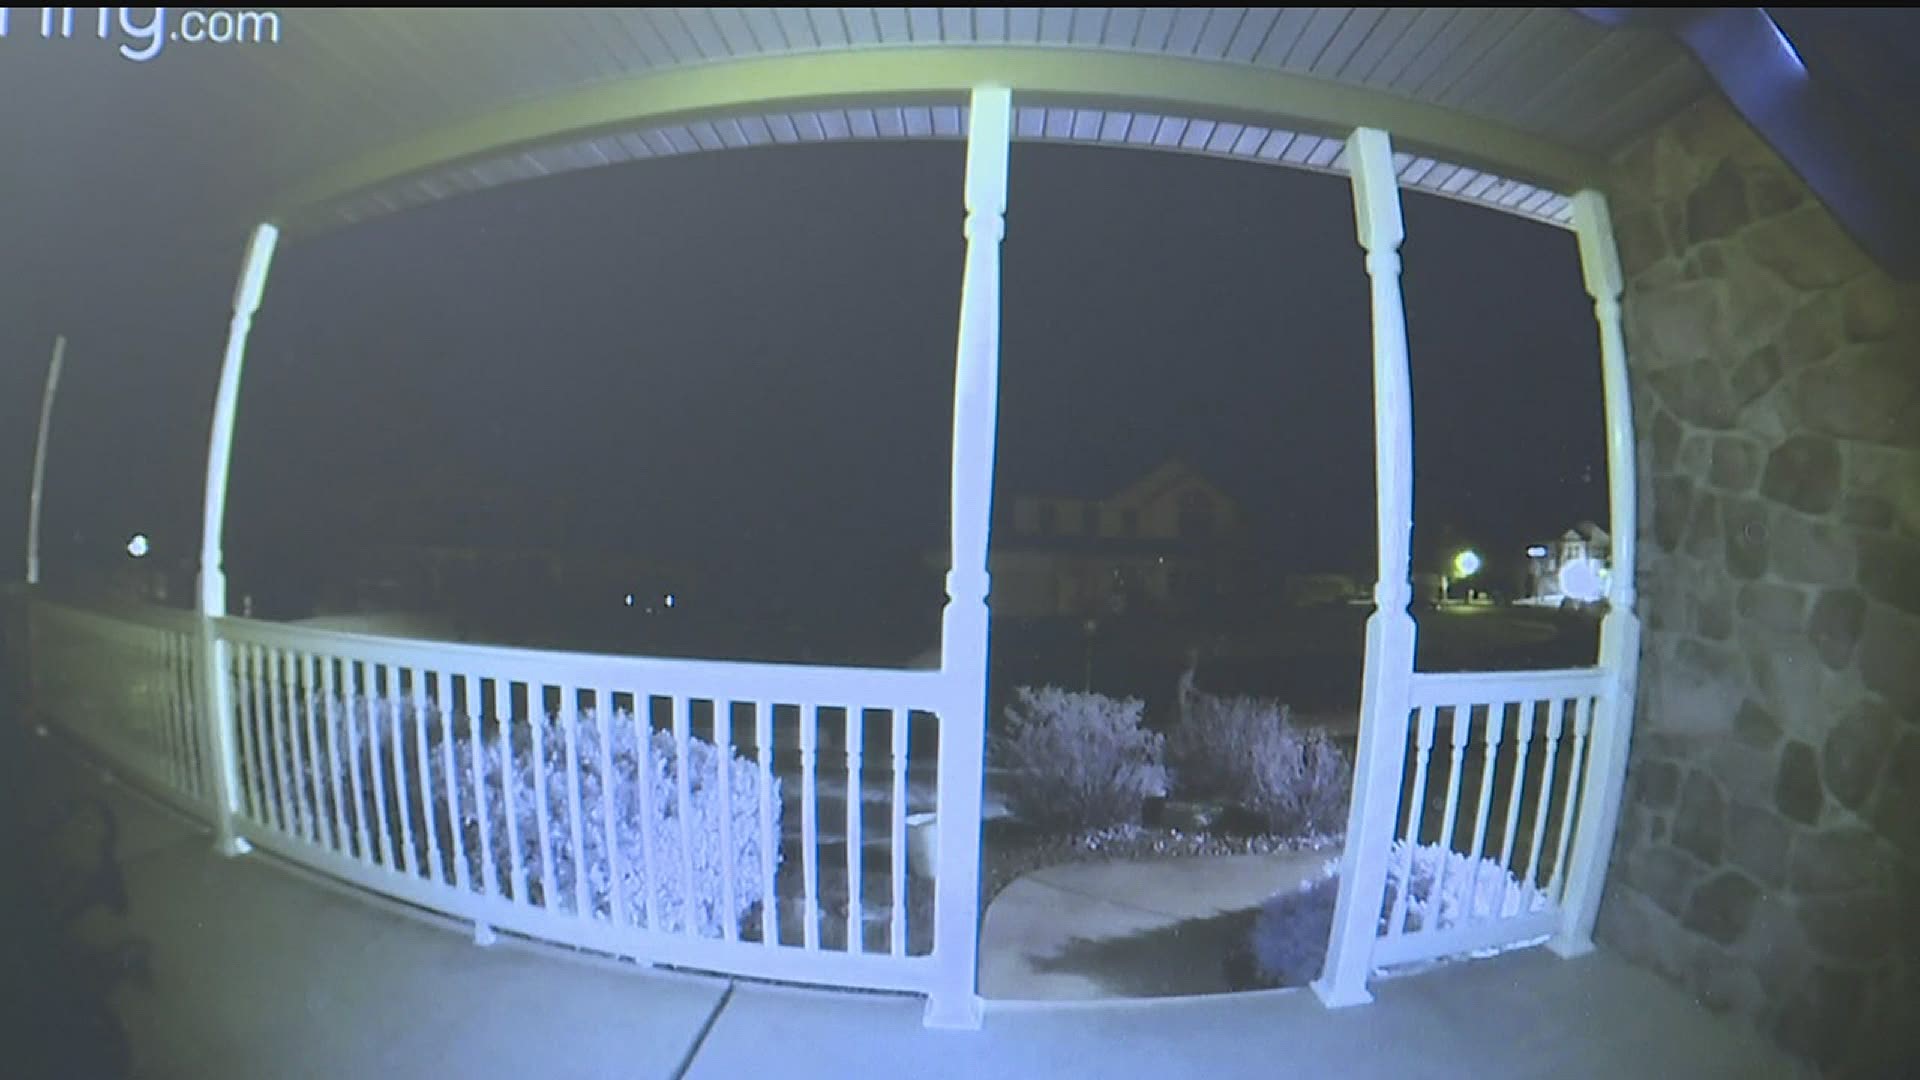 Many residents using doorbell cameras report prowler in the area